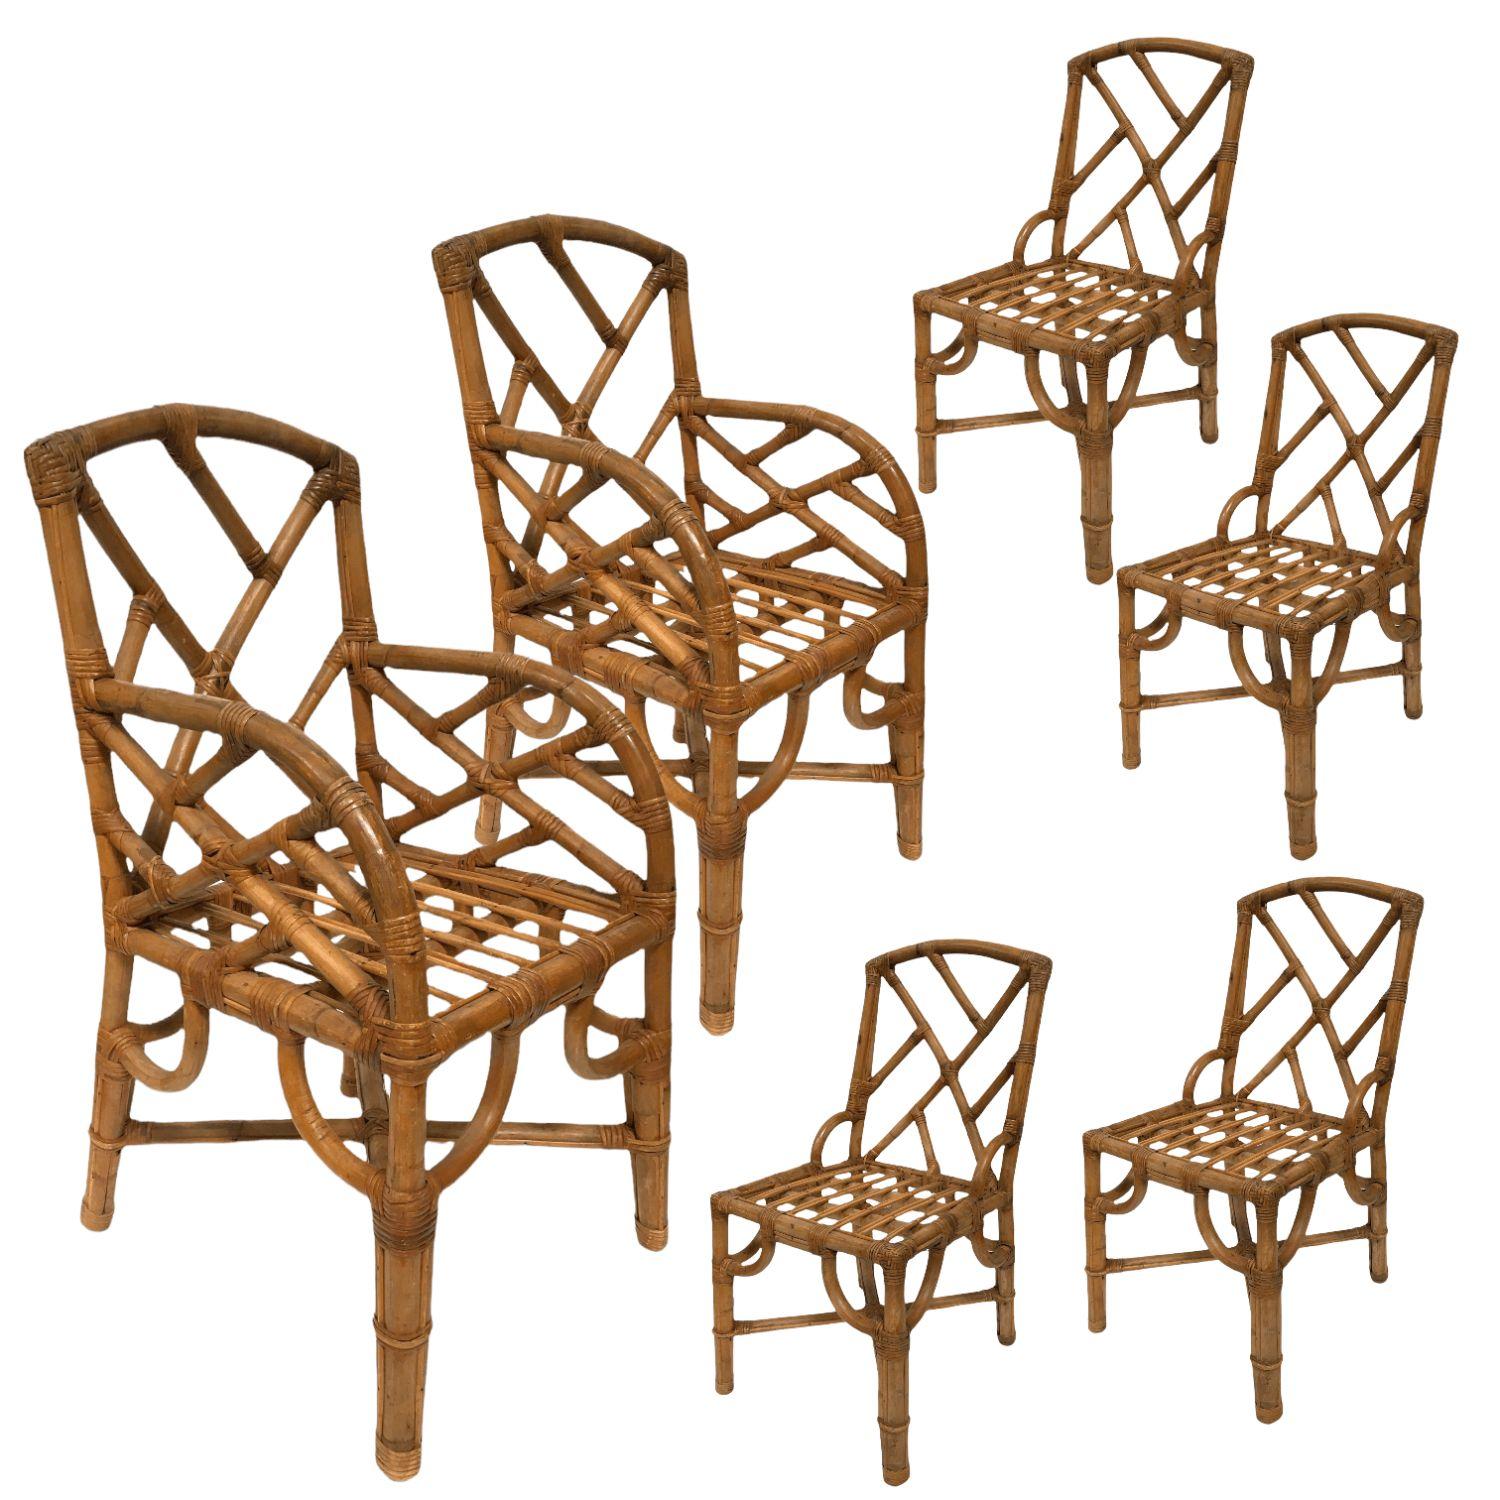 Vintage set of 9 Original Paul Frankl Rattan Dining Side and Armchairs. $27,000
 
This lot is made up of a total of 9 chairs, 2 side chairs, and 7 armchairs. All chairs feature a wonderful mid-century slanted leg rattan design with a geometric back